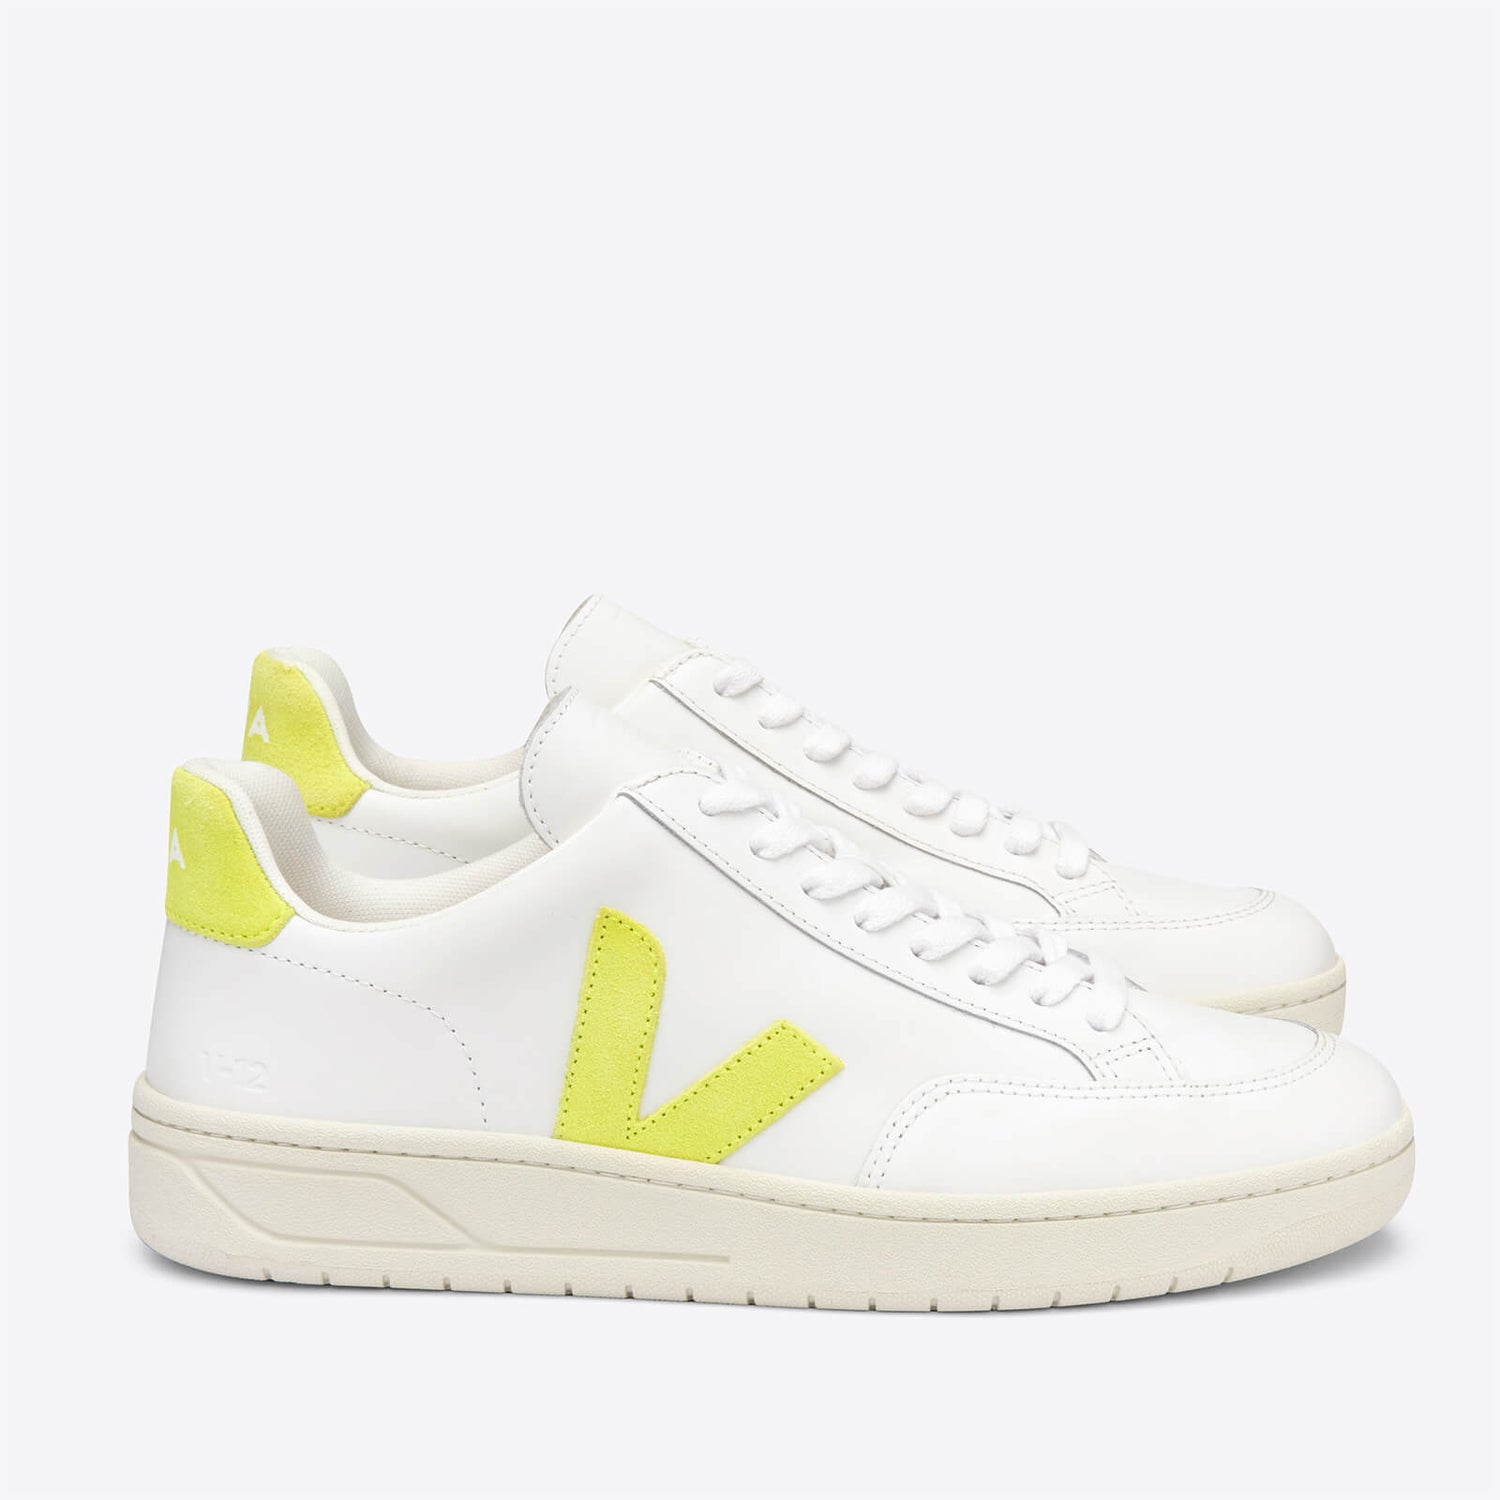 Veja Women's V-12 Leather Trainers - Extra White/Jaune/Fluo